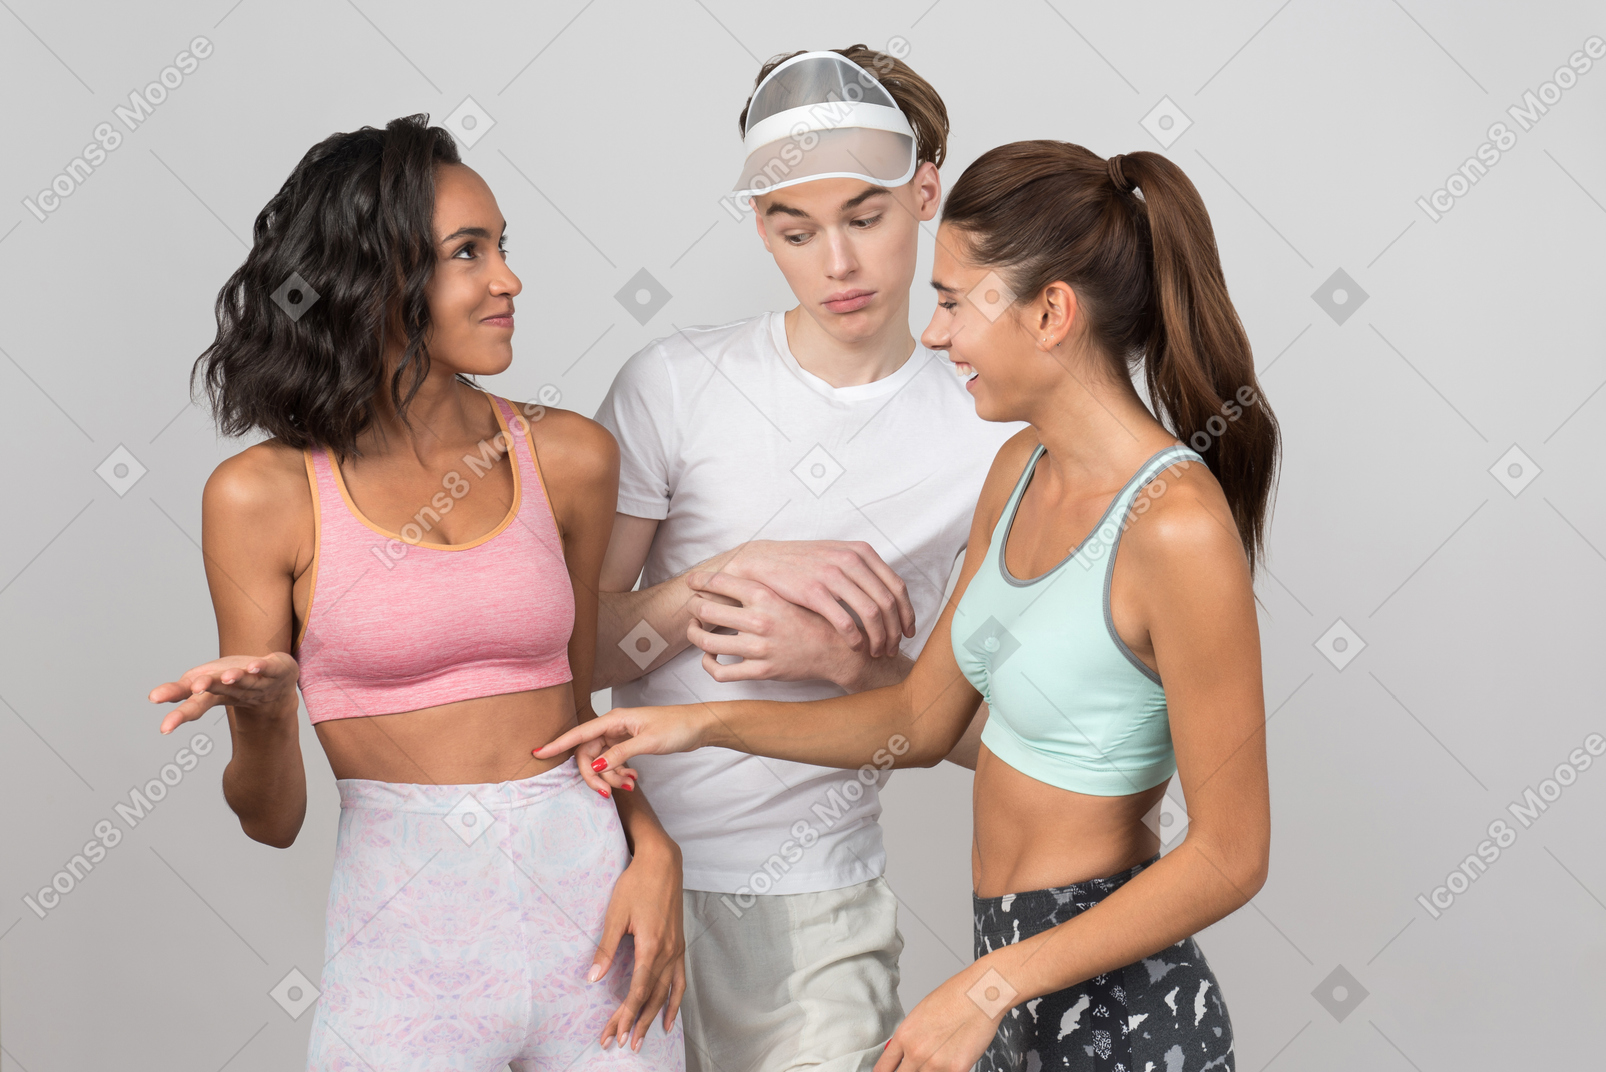 Checking out the friend's abs